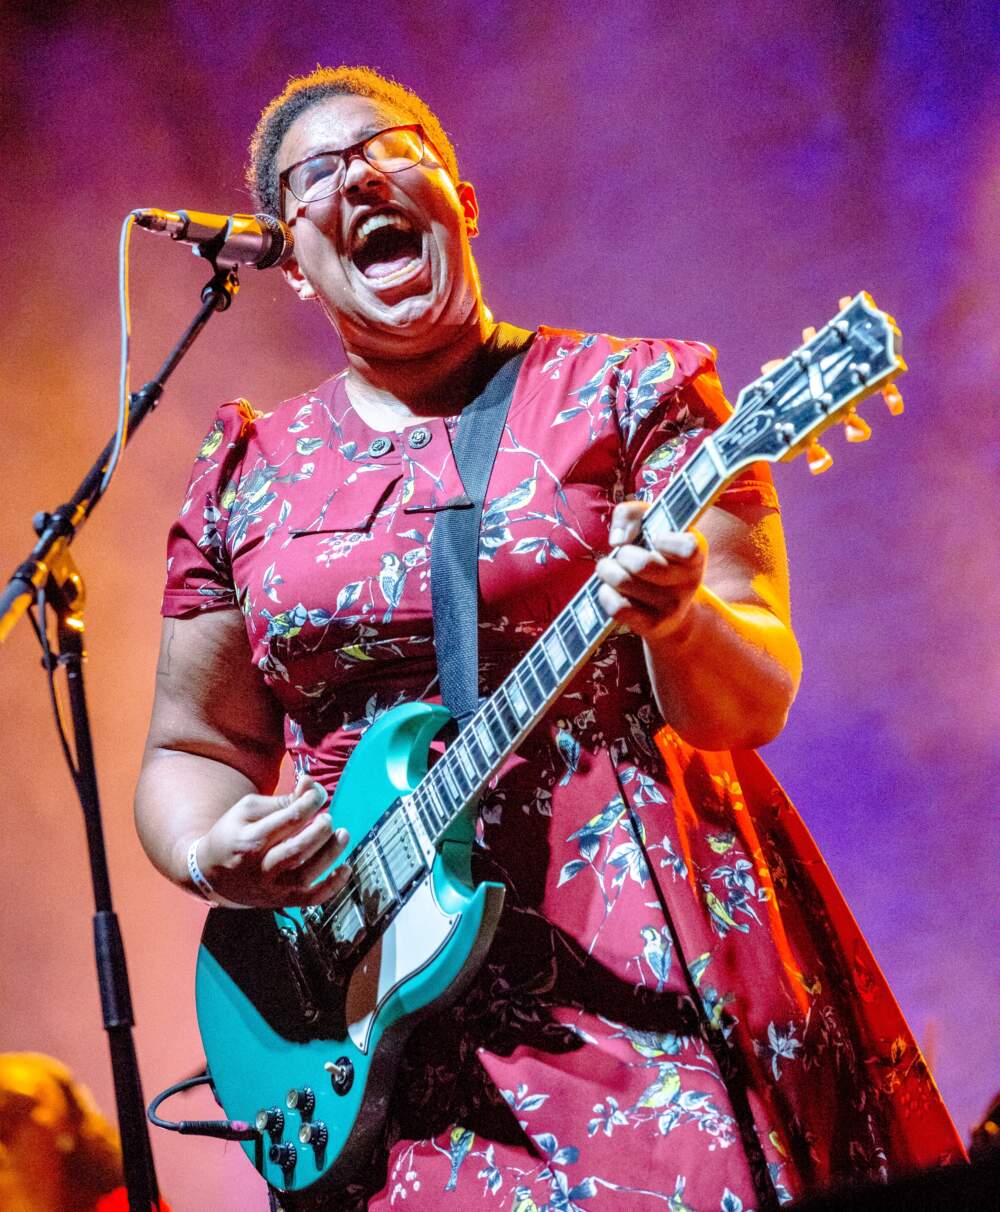 Brittany Howard onstage during a performance by the Alabama Shakes at Boston Calling in September 2015. (Courtesy Mike Diskin)